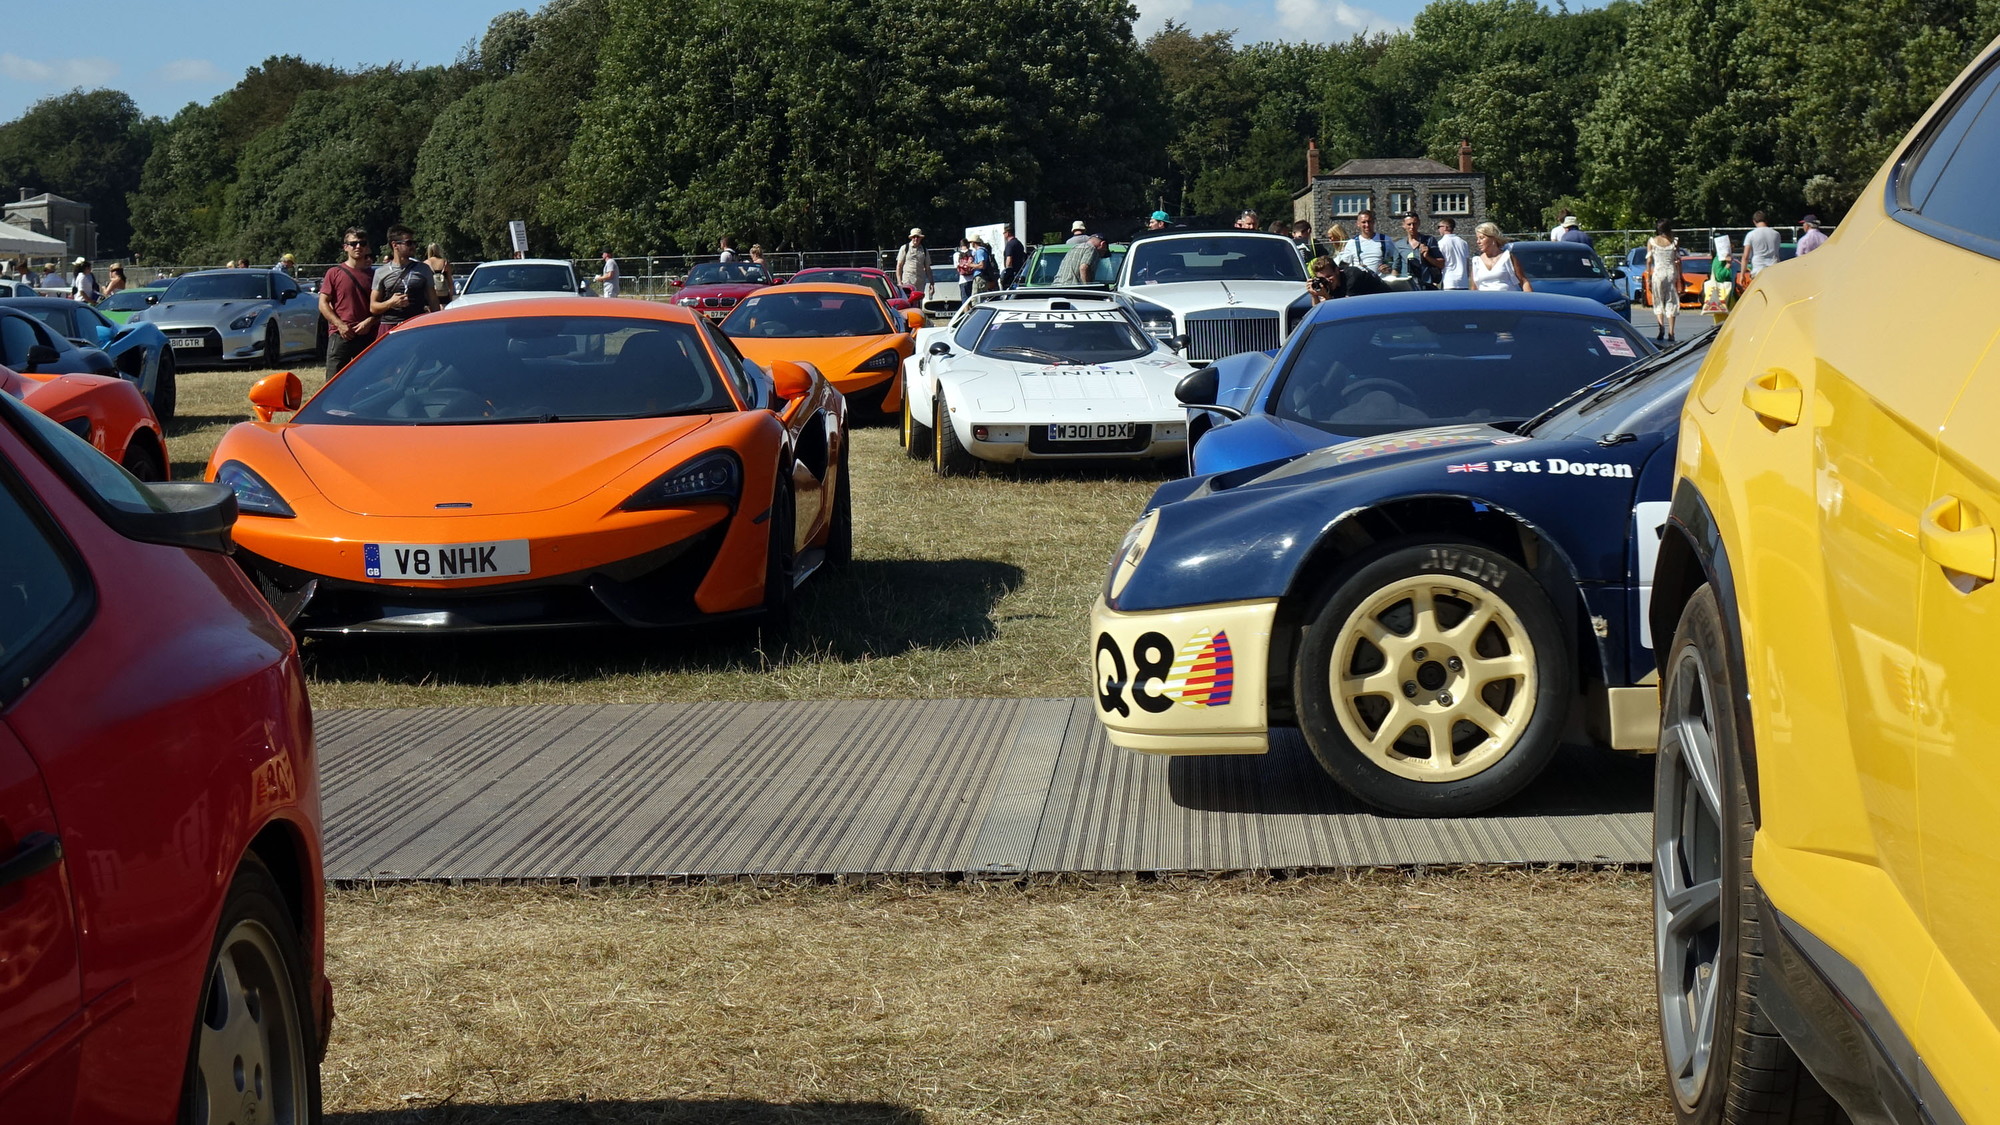 The parking lot at the 2018 Goodwood Festival of Speed